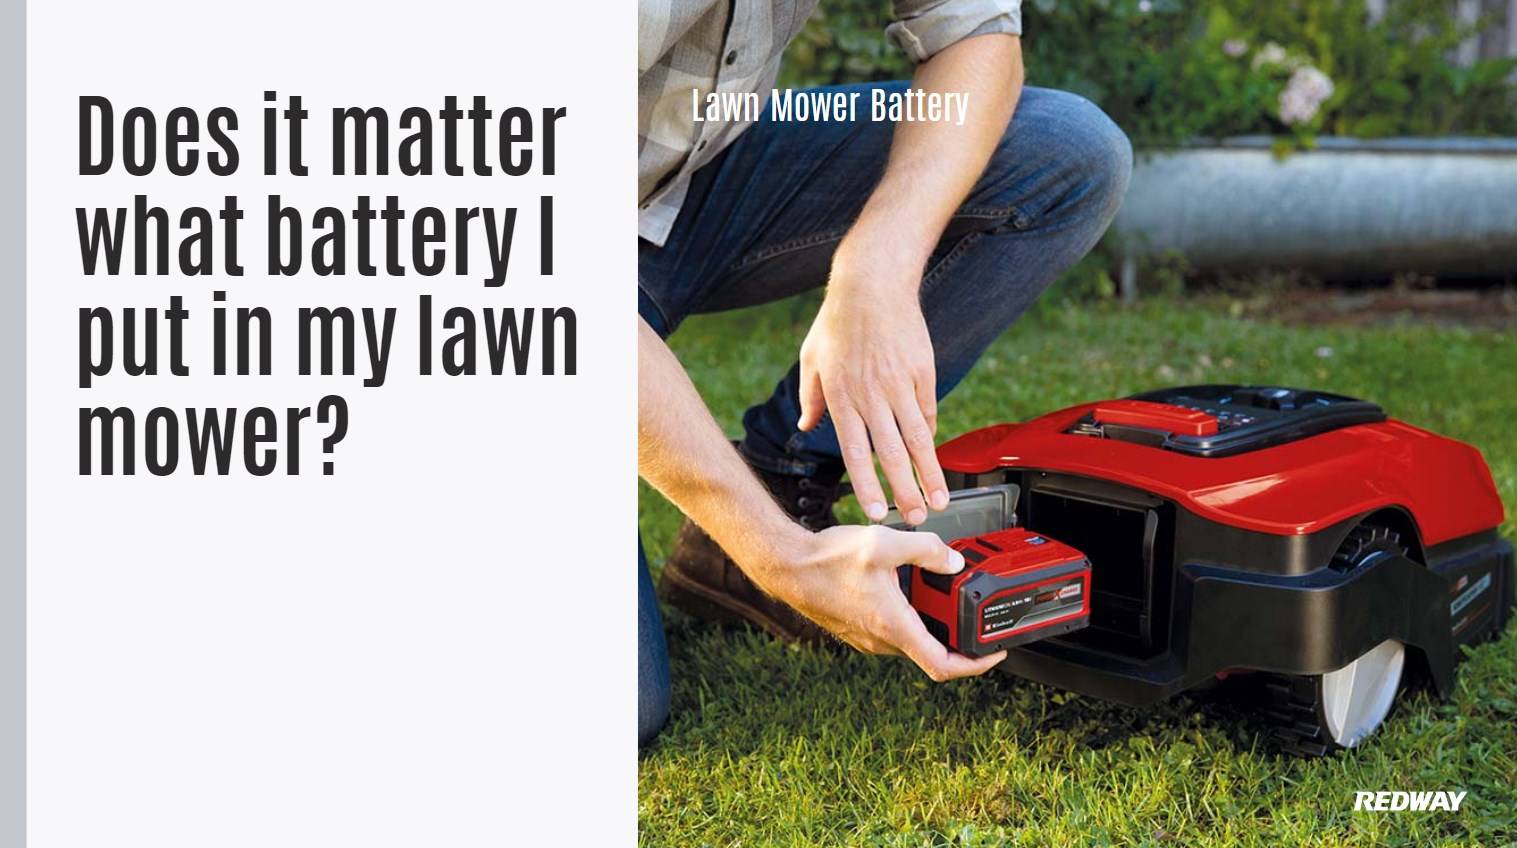 Does it matter what battery I put in my lawn mower?